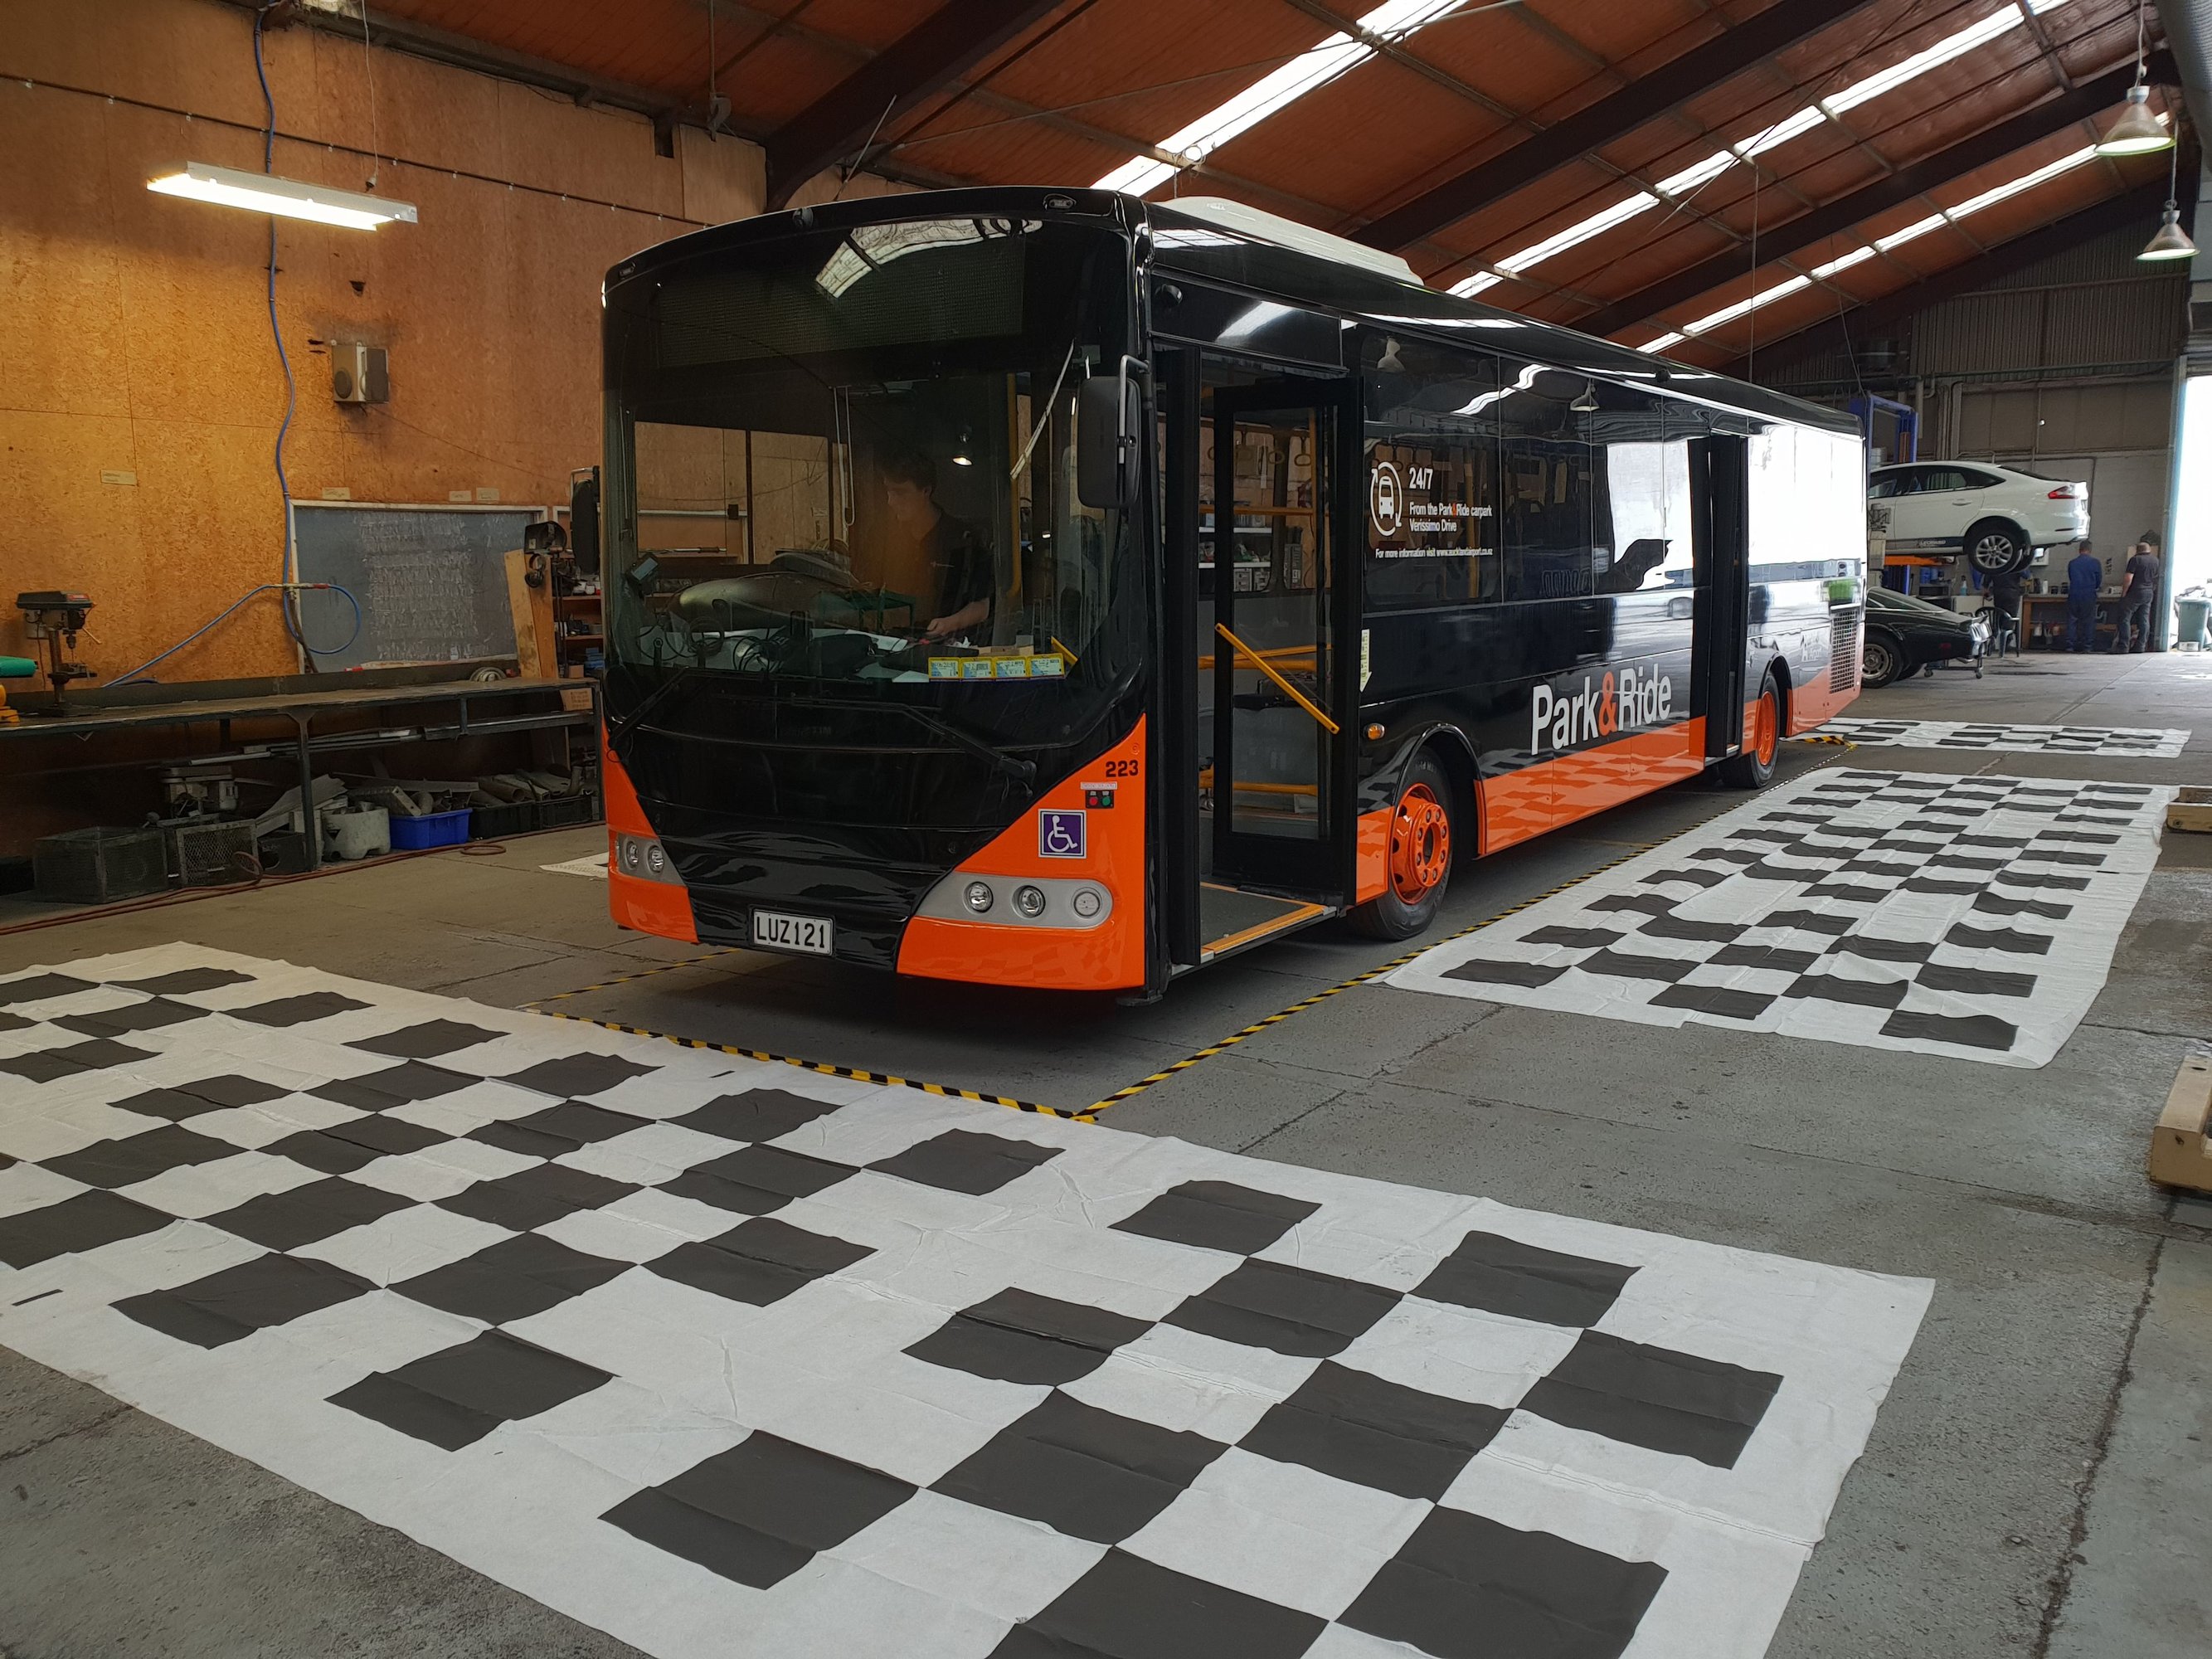 A Park & Ride urban bus in the workshop